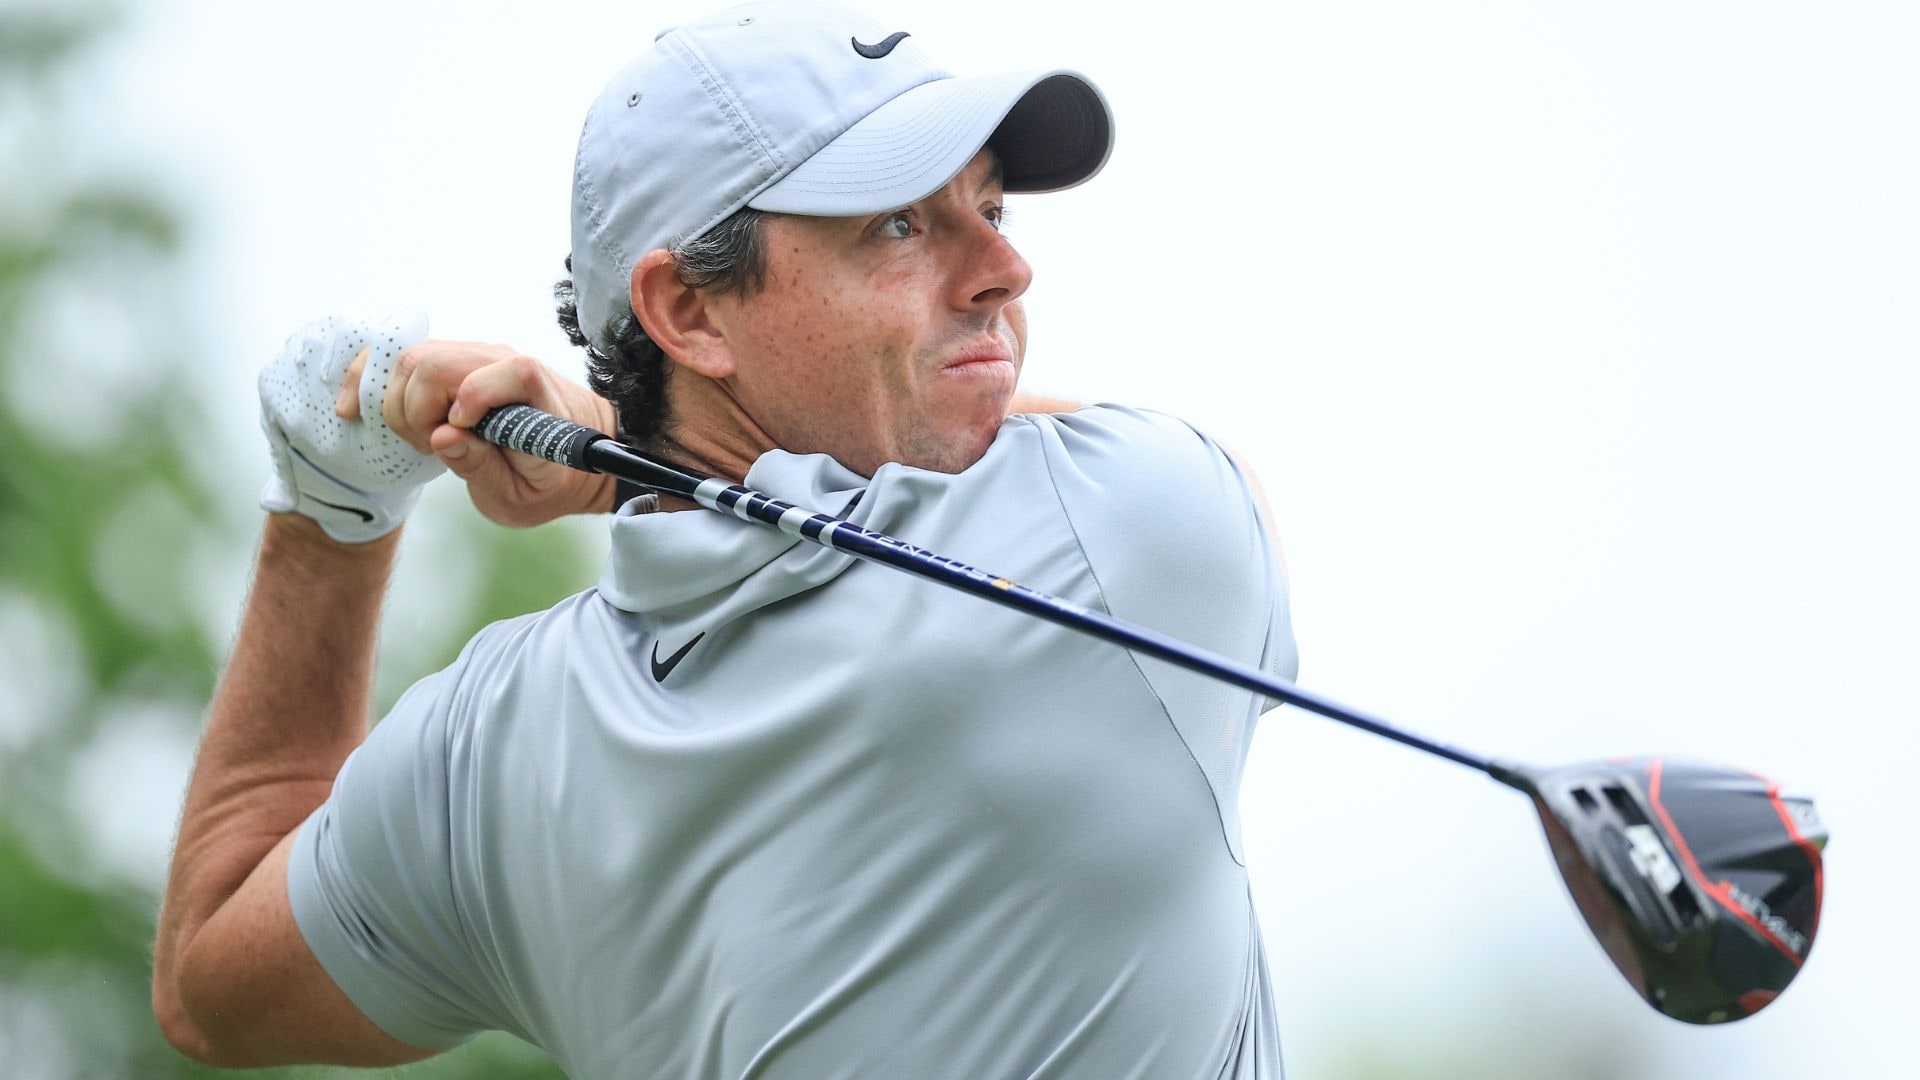 2023 PGA Championship: Just five shots back, McIlroy ready to ‘bomb it everywhere’ to get into contention at Oak Hill